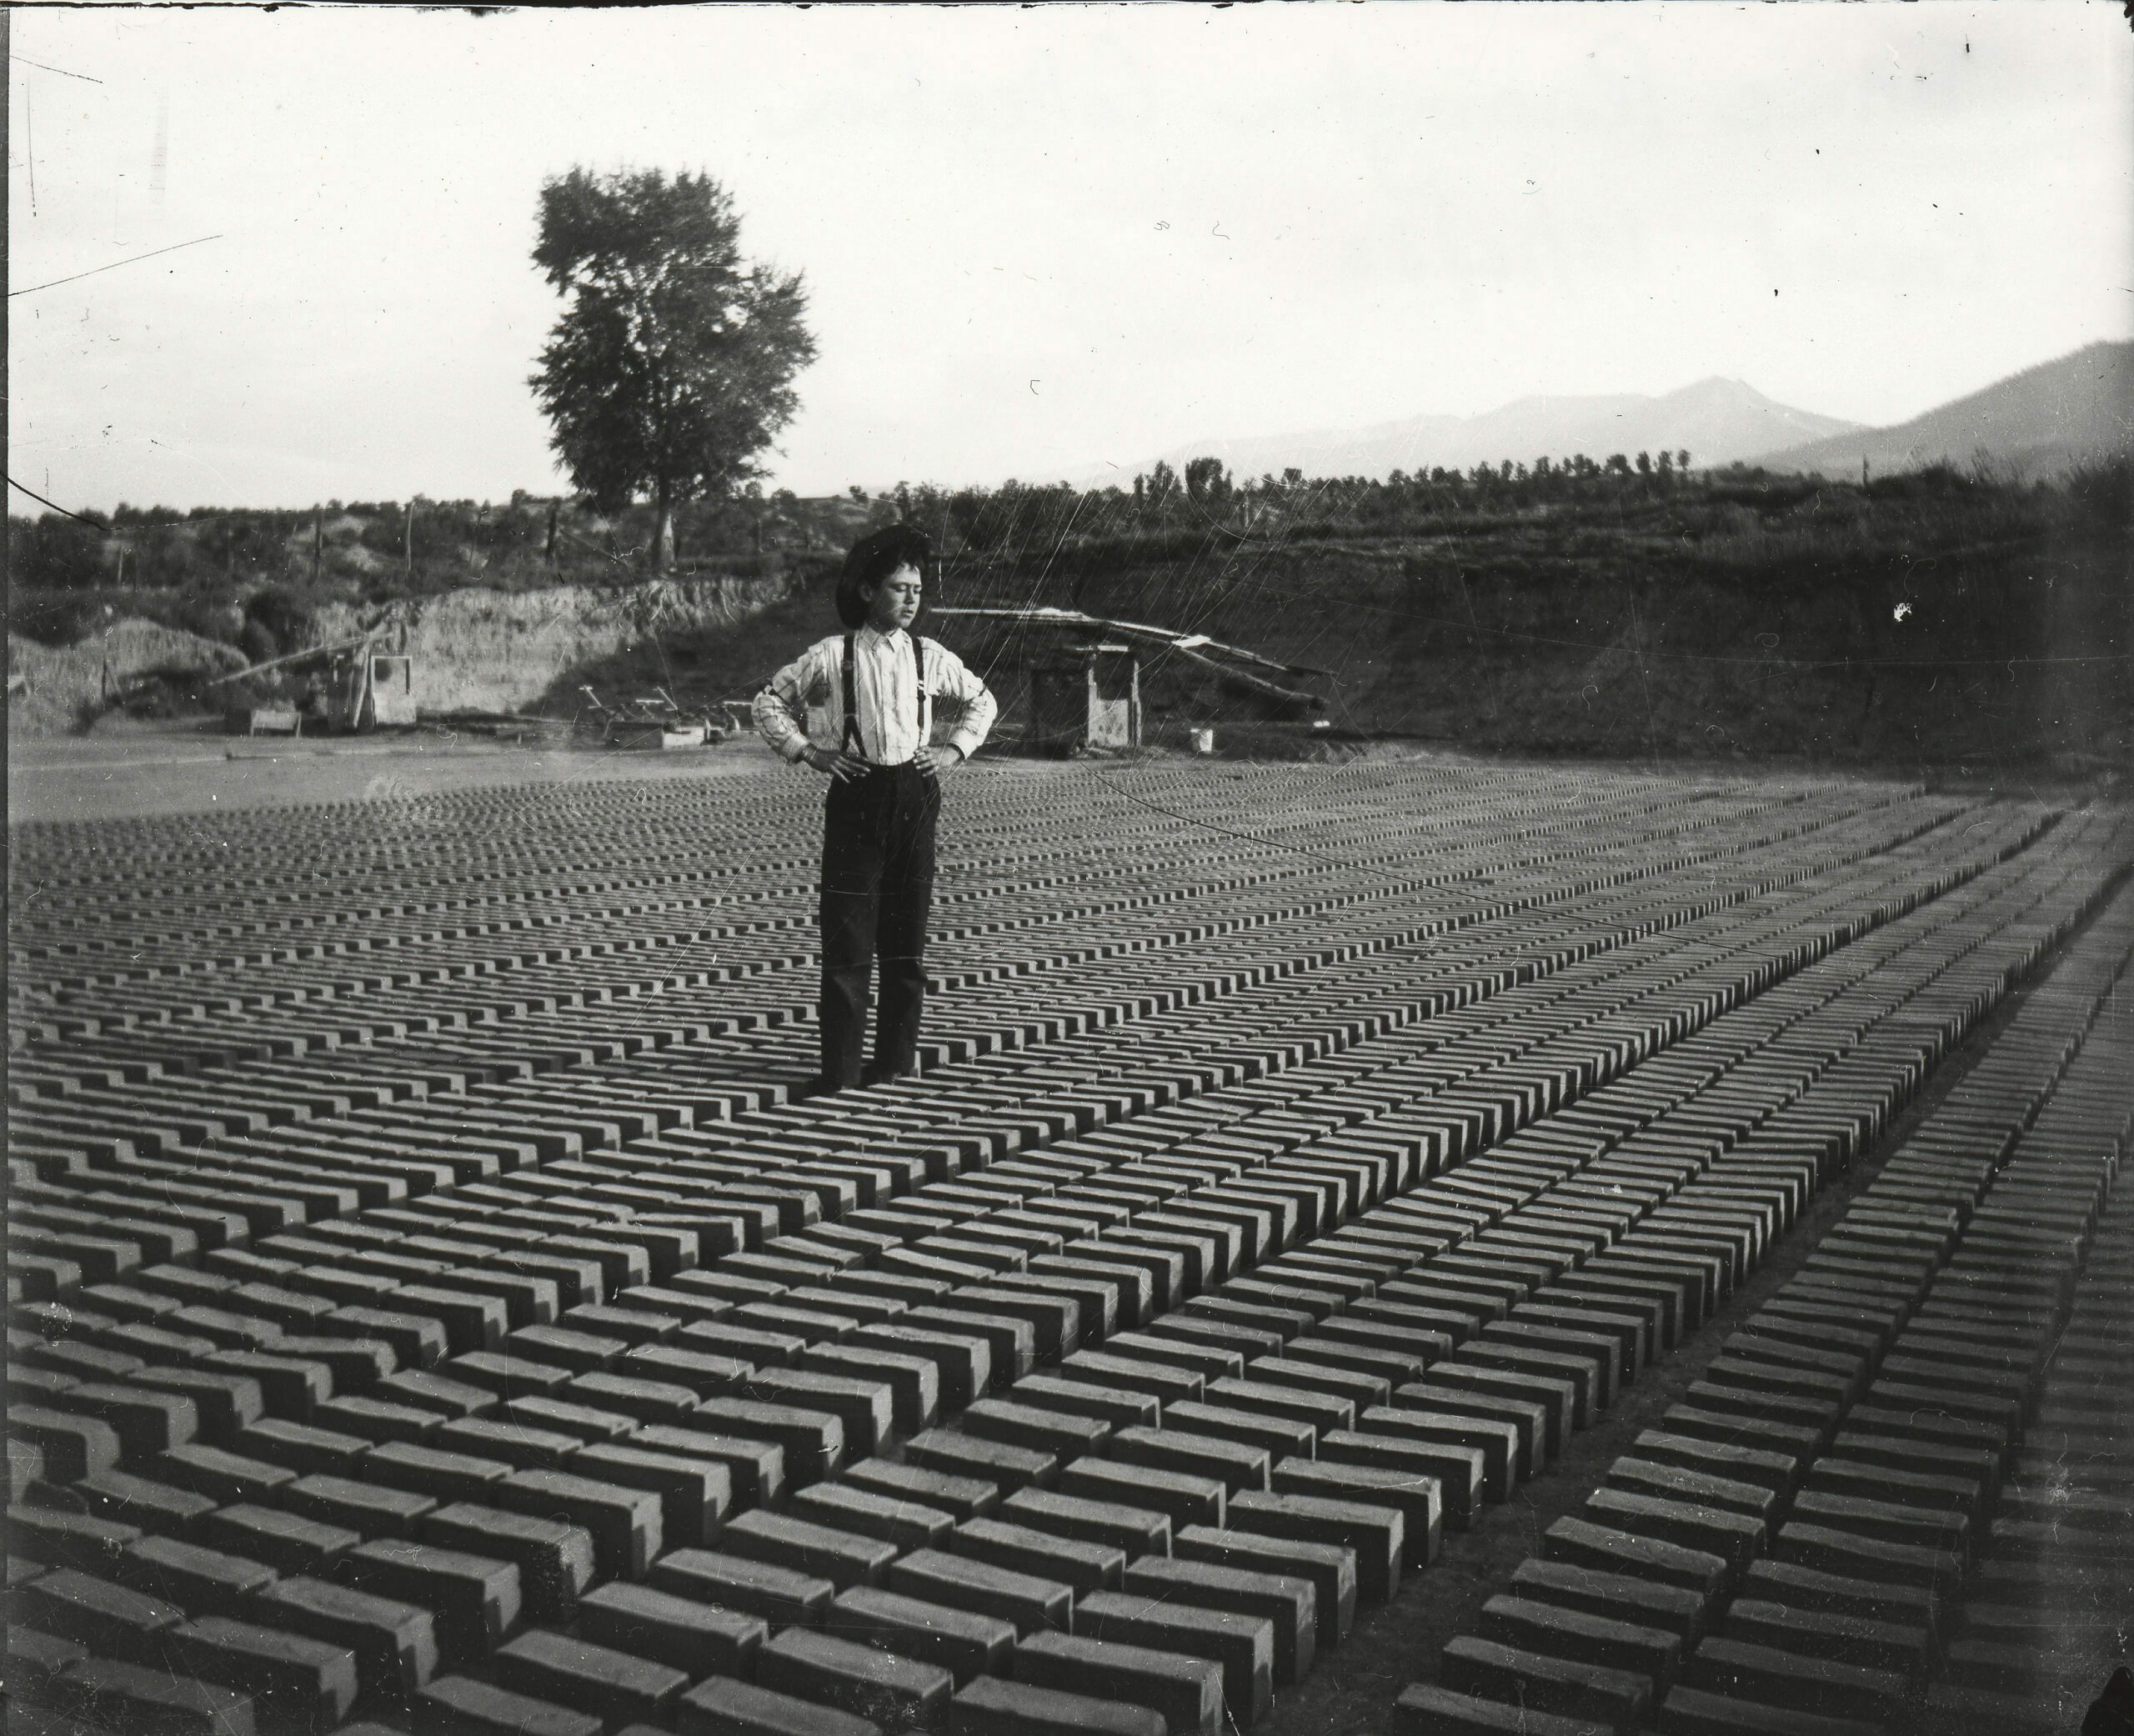 Bricks drying in the sun. Clay was packed into three-brick molds which were then dumped on the ground in long rows to sun dry. This unidentified boy may have been responsible for the thousands of bricks drying around him. Most of Salida’s buildings are made of this soft, red local brick.  (1)